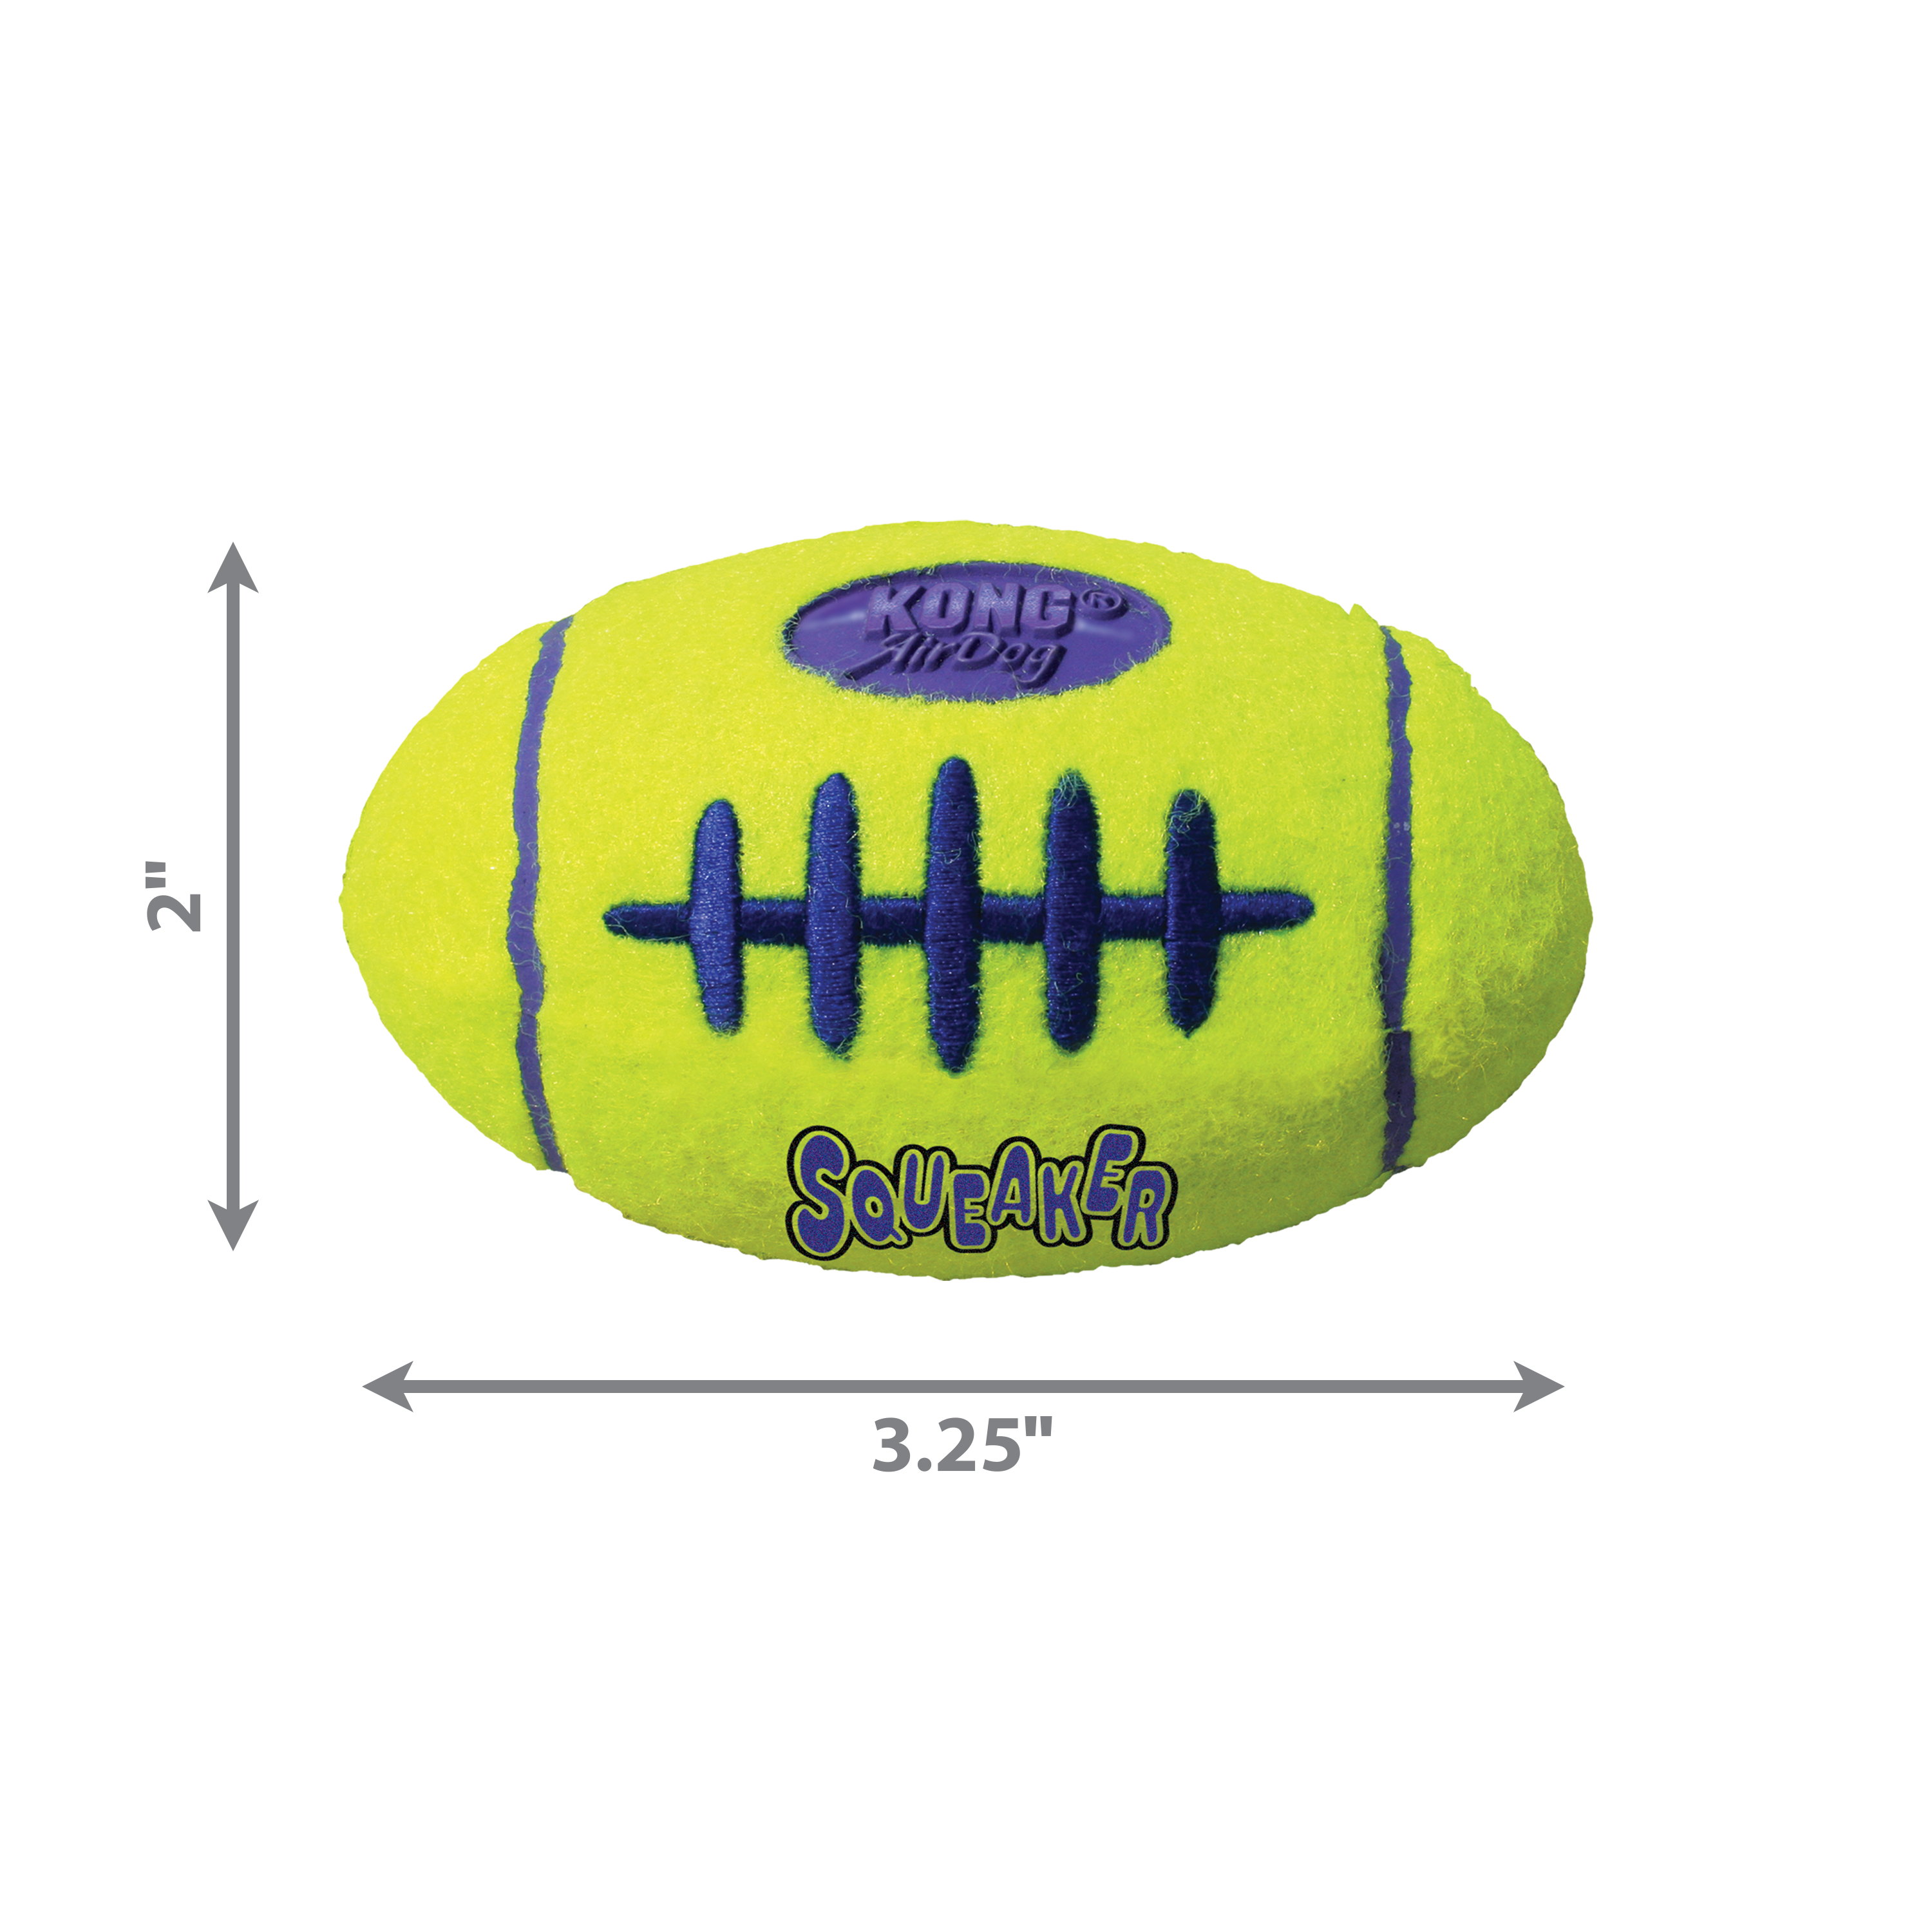 AirDog Squeaker Football dimoffpack product image